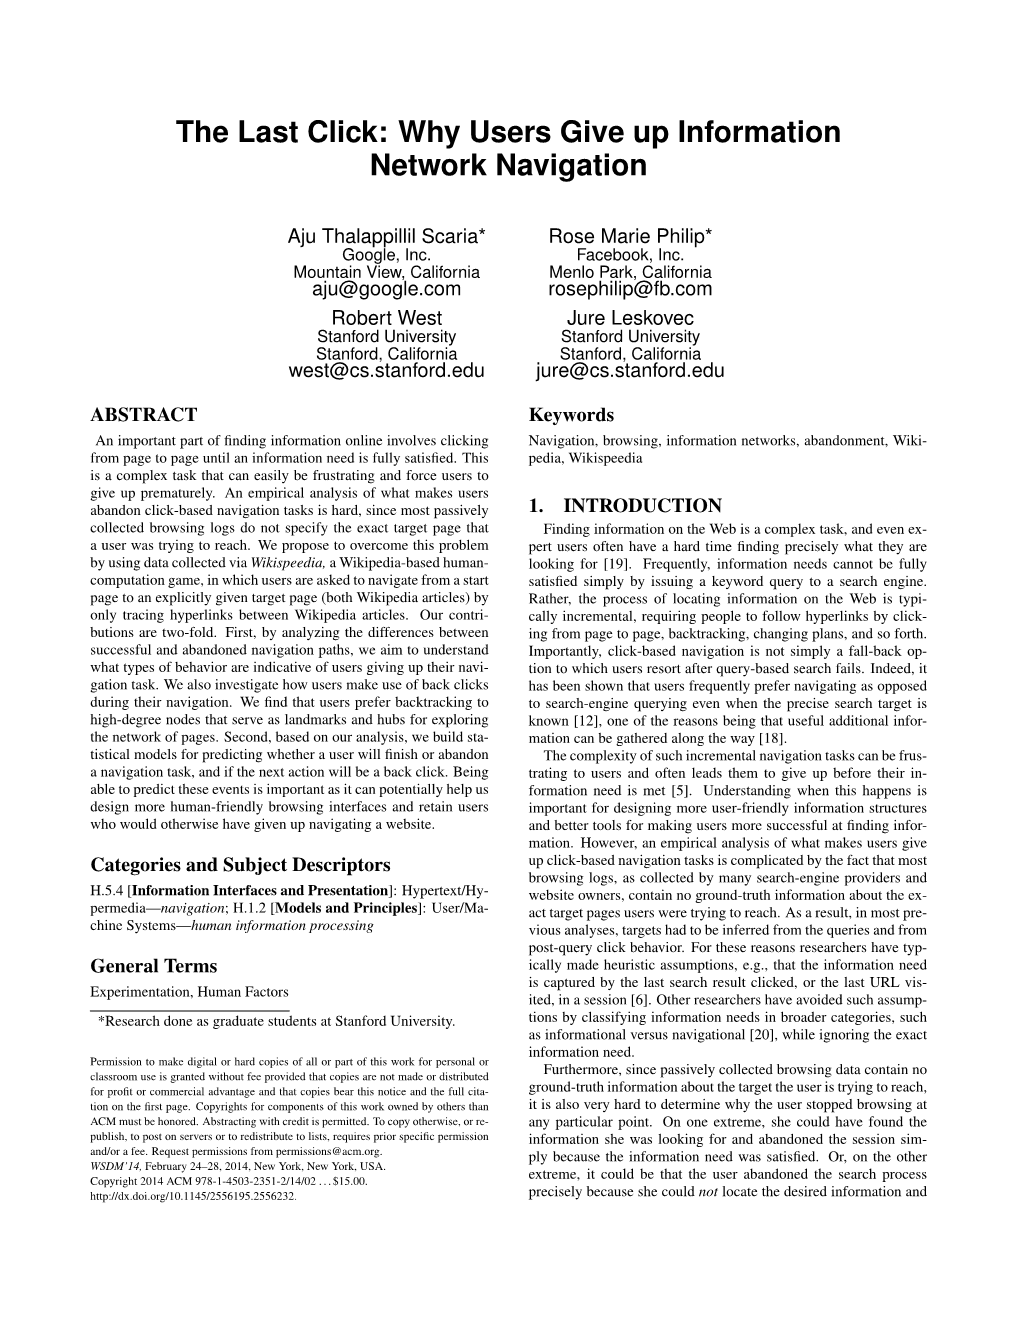 The Last Click: Why Users Give up Information Network Navigation